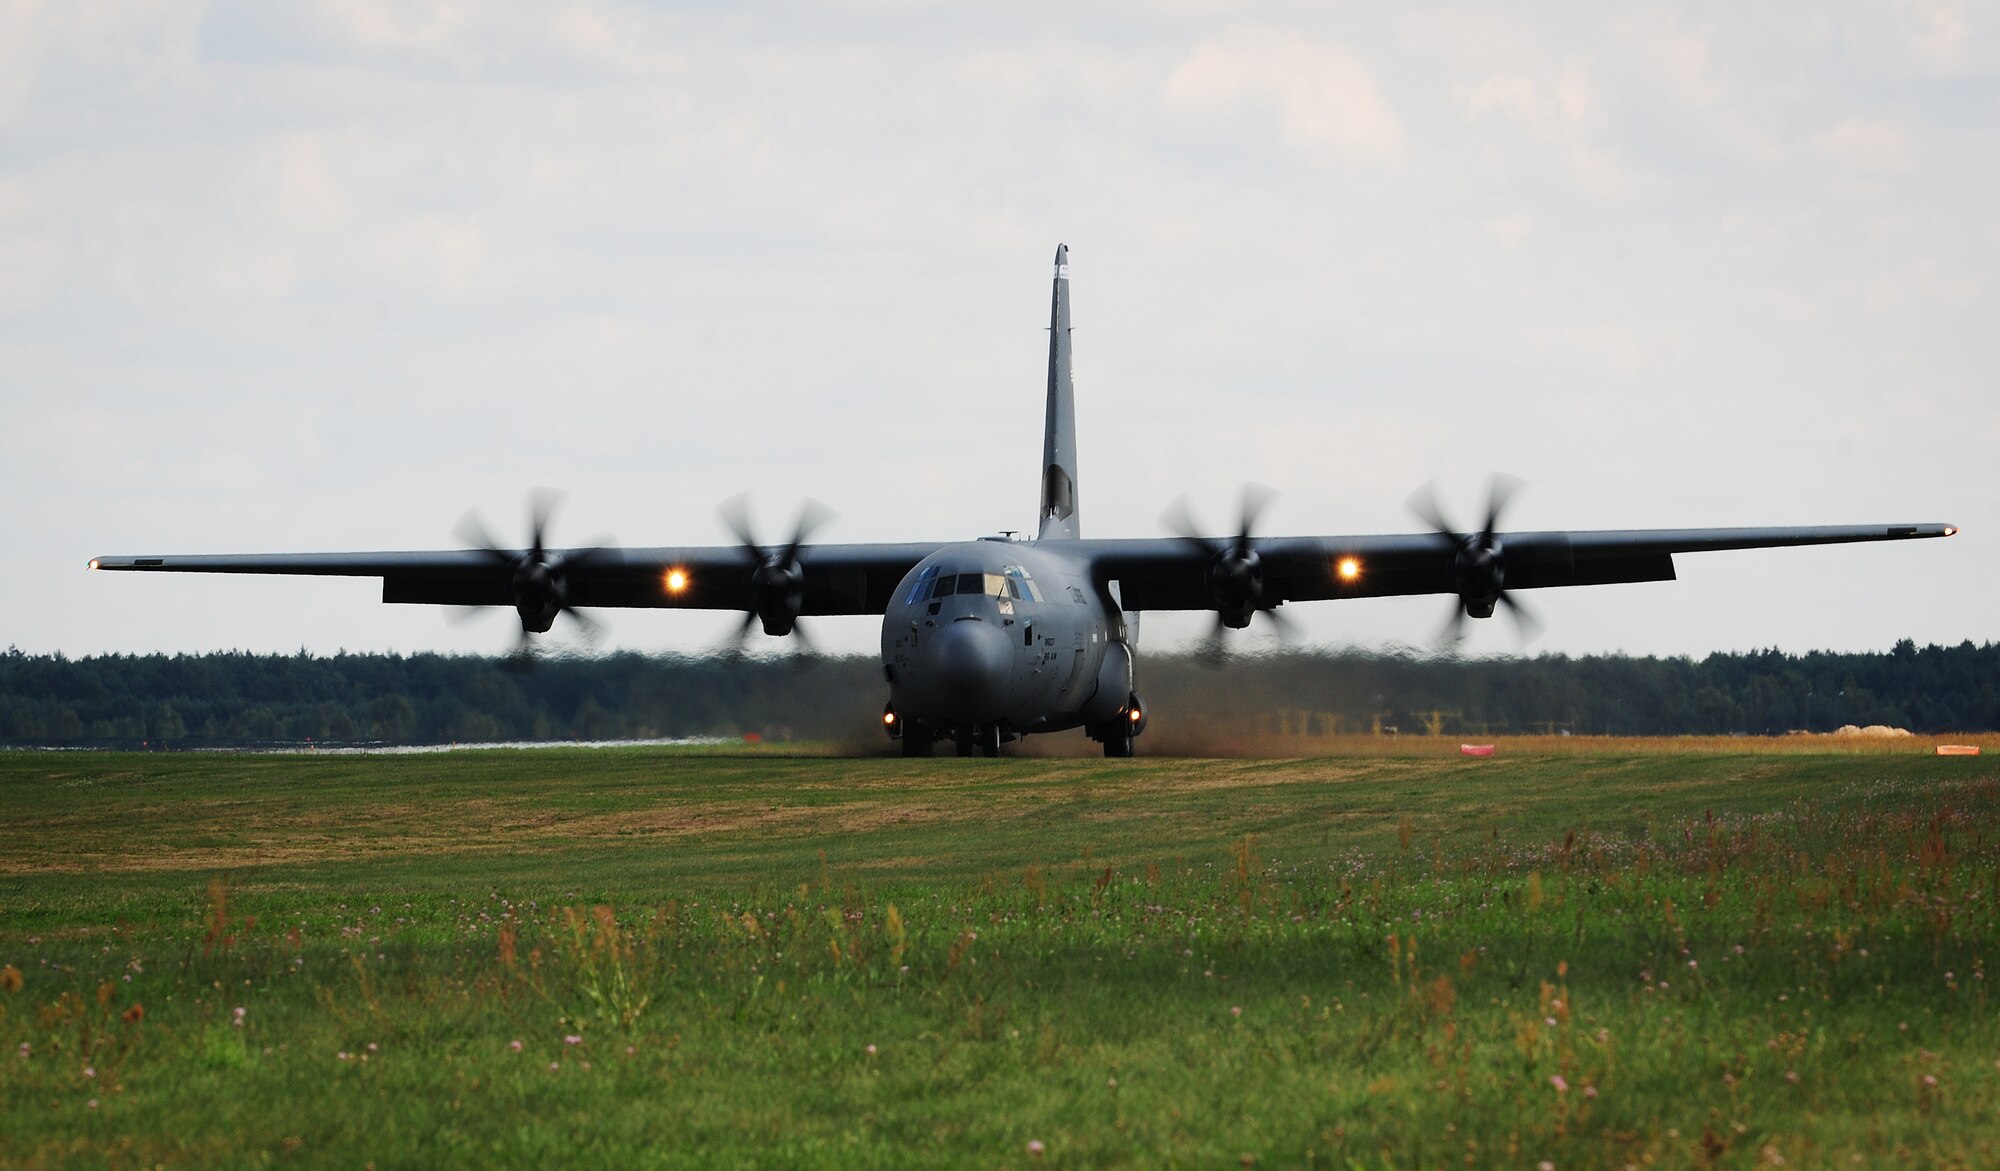 A C-130J Super Hercules lands on an unimproved runway Aug. 25, 2014, at Powidz Air Base, Poland. Throughout the deployment to Poland, Airmen were able to work with NATO partners to develop and improve forces capable of maintaining regional security. (U.S. Air Force photo/Staff Sgt. Jarad A. Denton)